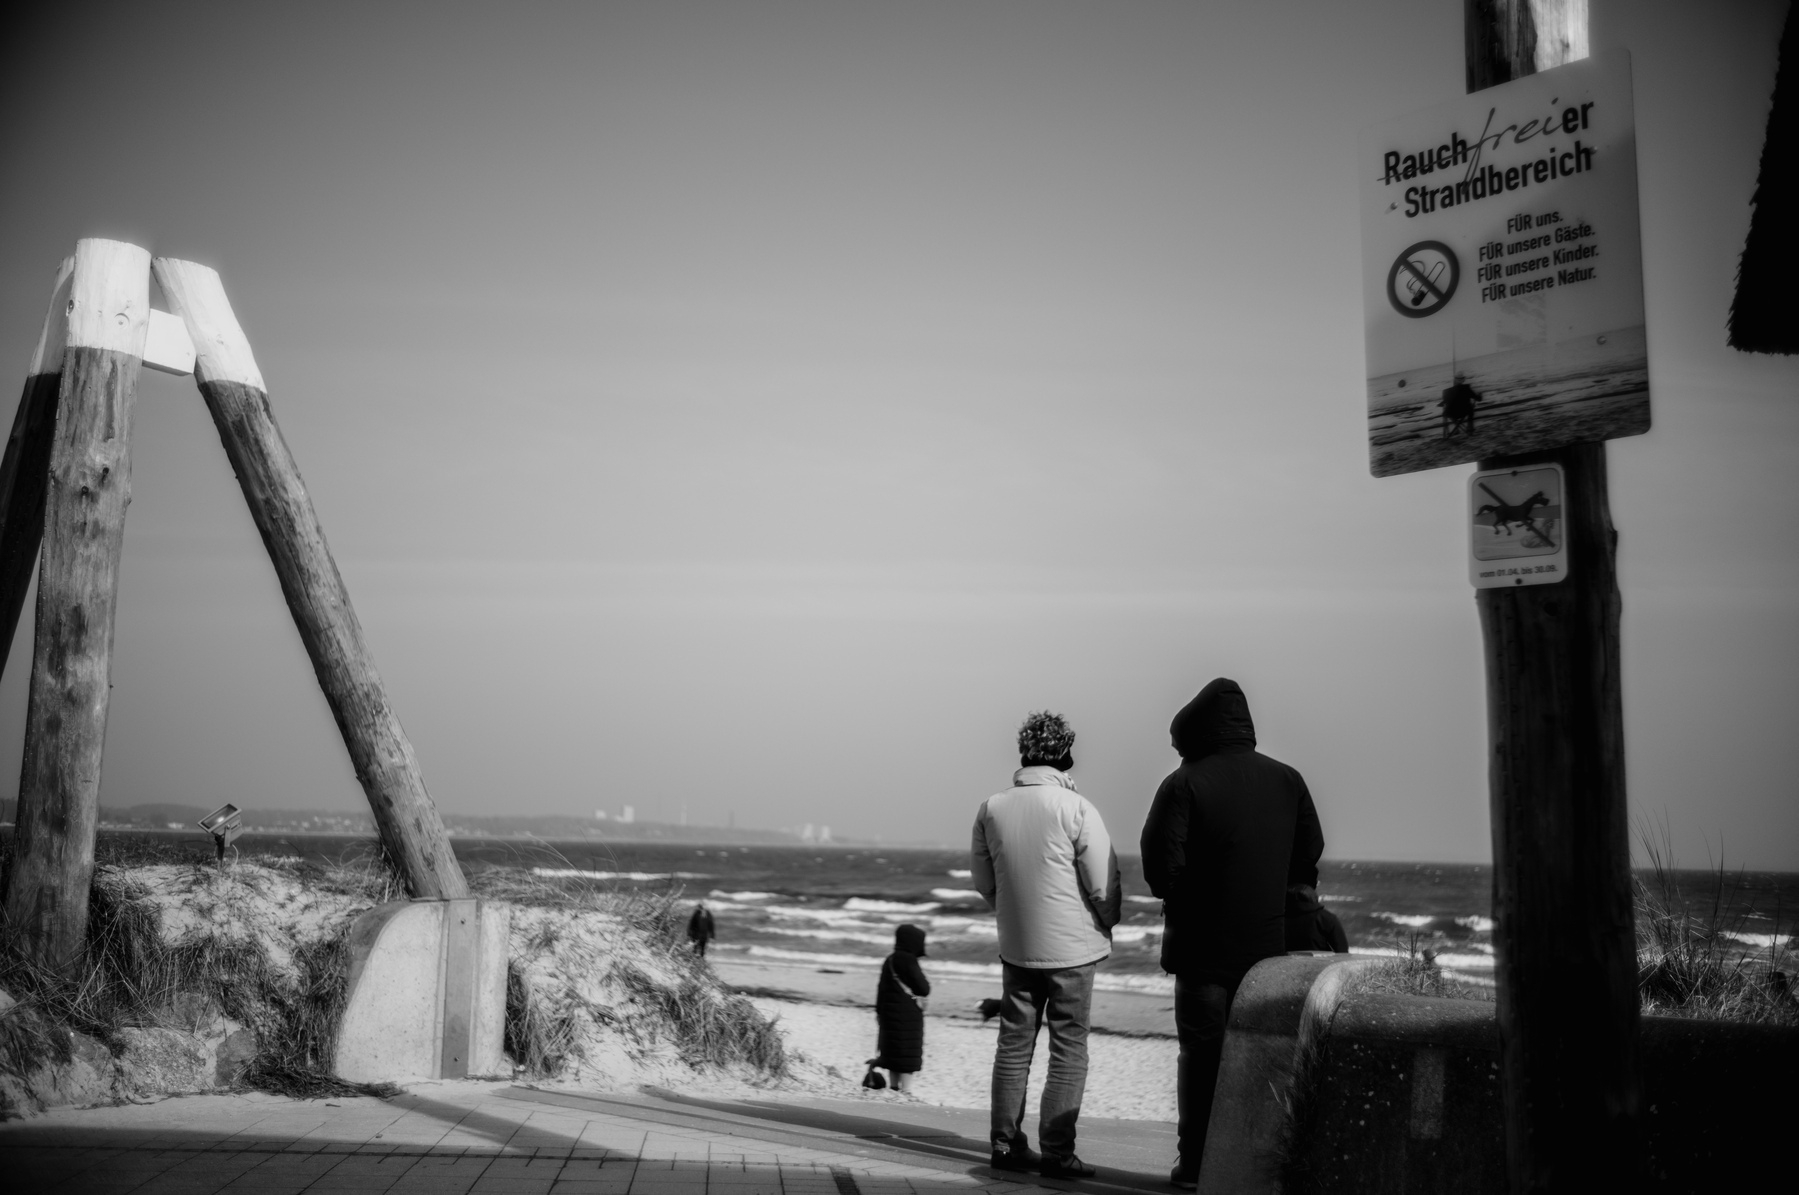 The image shows a black and white scene of two adults observing another person by the ocean on a smoke-free beach, with a clear sky and distant structures on the horizon.